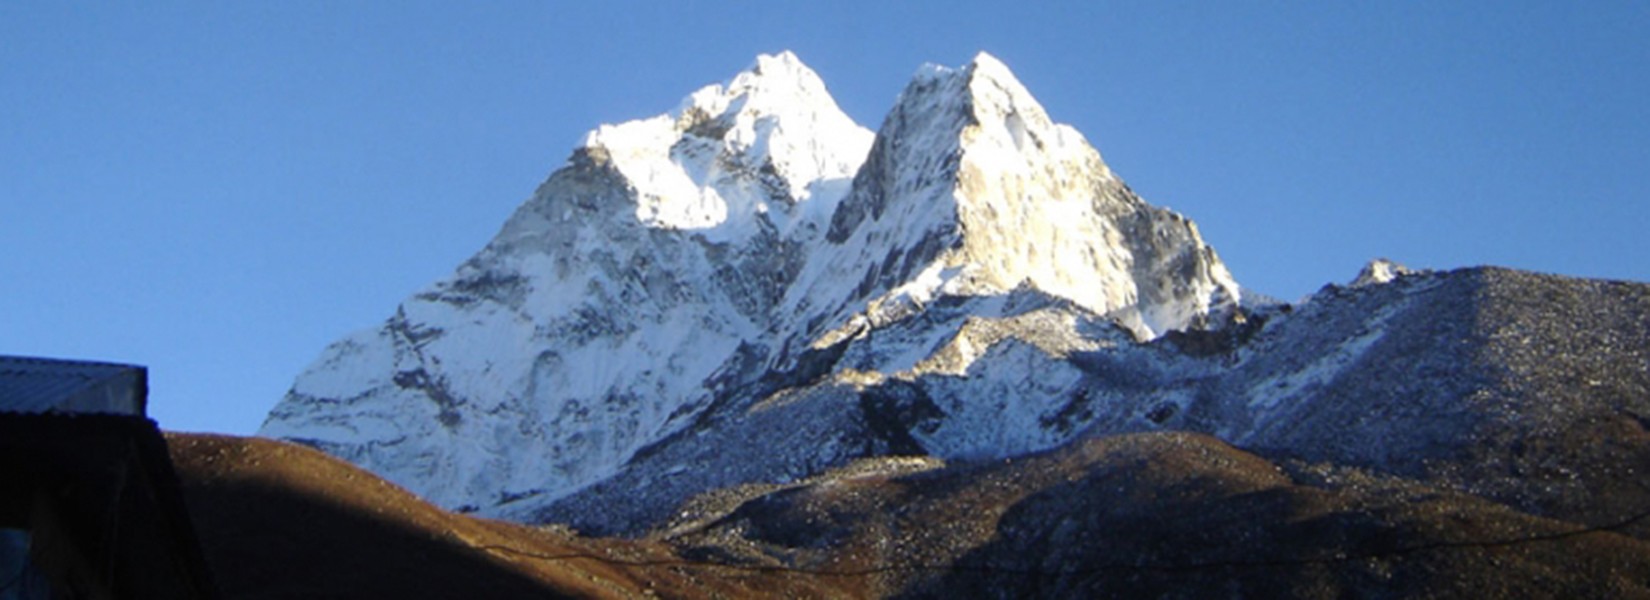 Nepal Expedition Banner Image